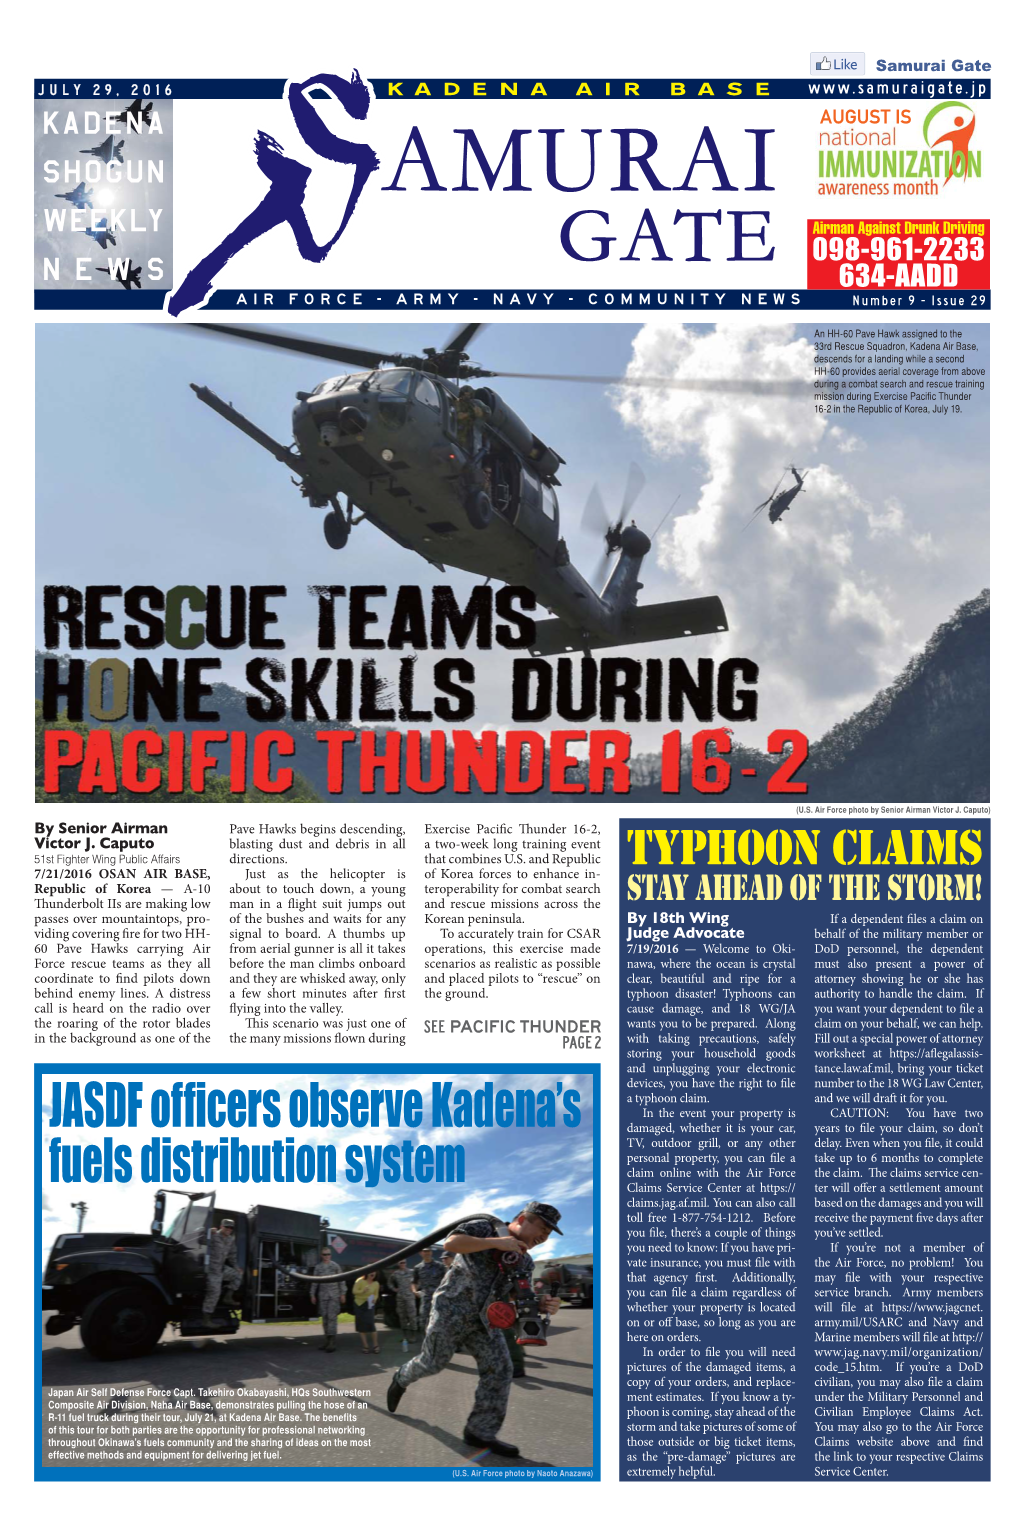 SAMURAI GATE JULY 29, 2016 PACIFIC THUNDER from PAGE 1 18Th MDOS Holds Assumption During One Rescue Training of Feet in the Air